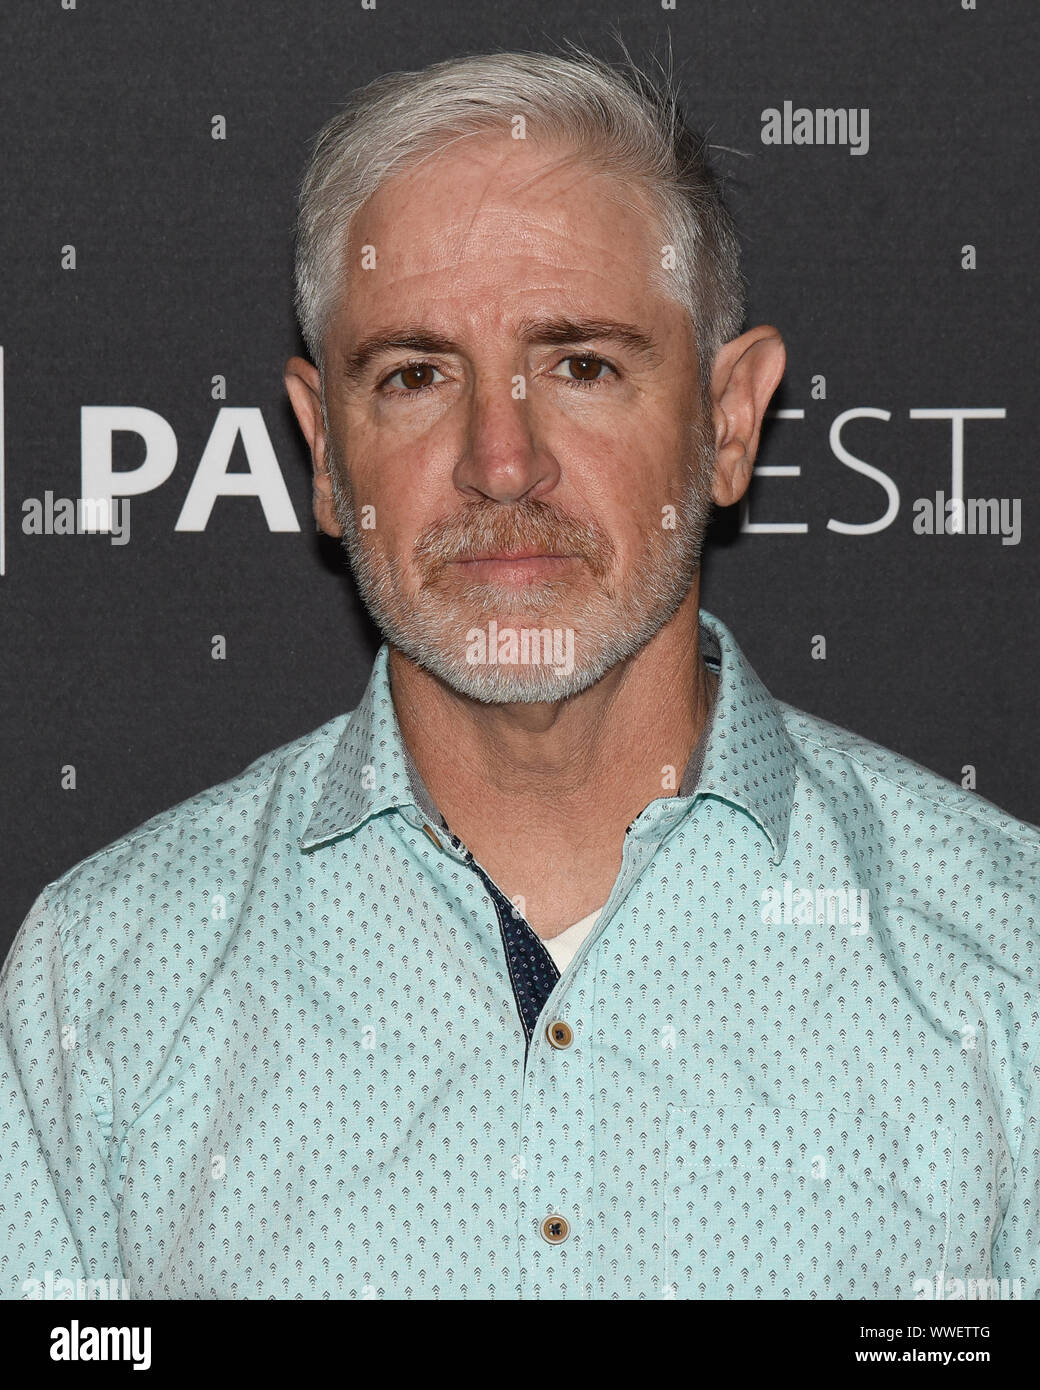 September 15, 2019, Beverly Hills, California, USA: Carlos Alazraqui of ''The Casagrandes'' The Paley Center For Media's 13th Annual PaleyFest Fall TV Previews - TBS. (Credit Image: © Billy Bennight/ZUMA Wire) Stock Photo